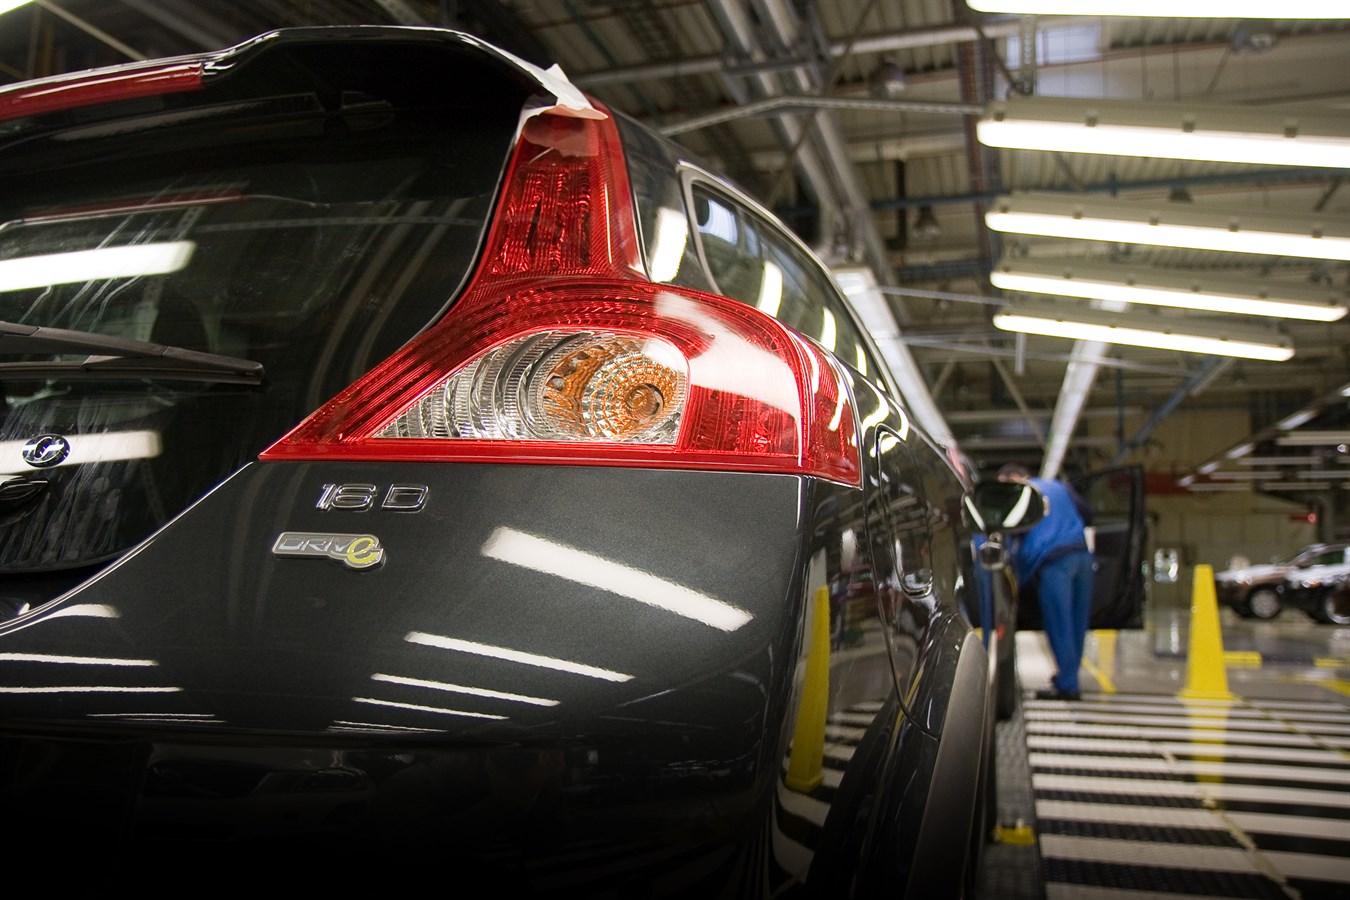 The first Volvo C30 1.6D DRIVe has now been produced in Volvo Cars Ghent plant